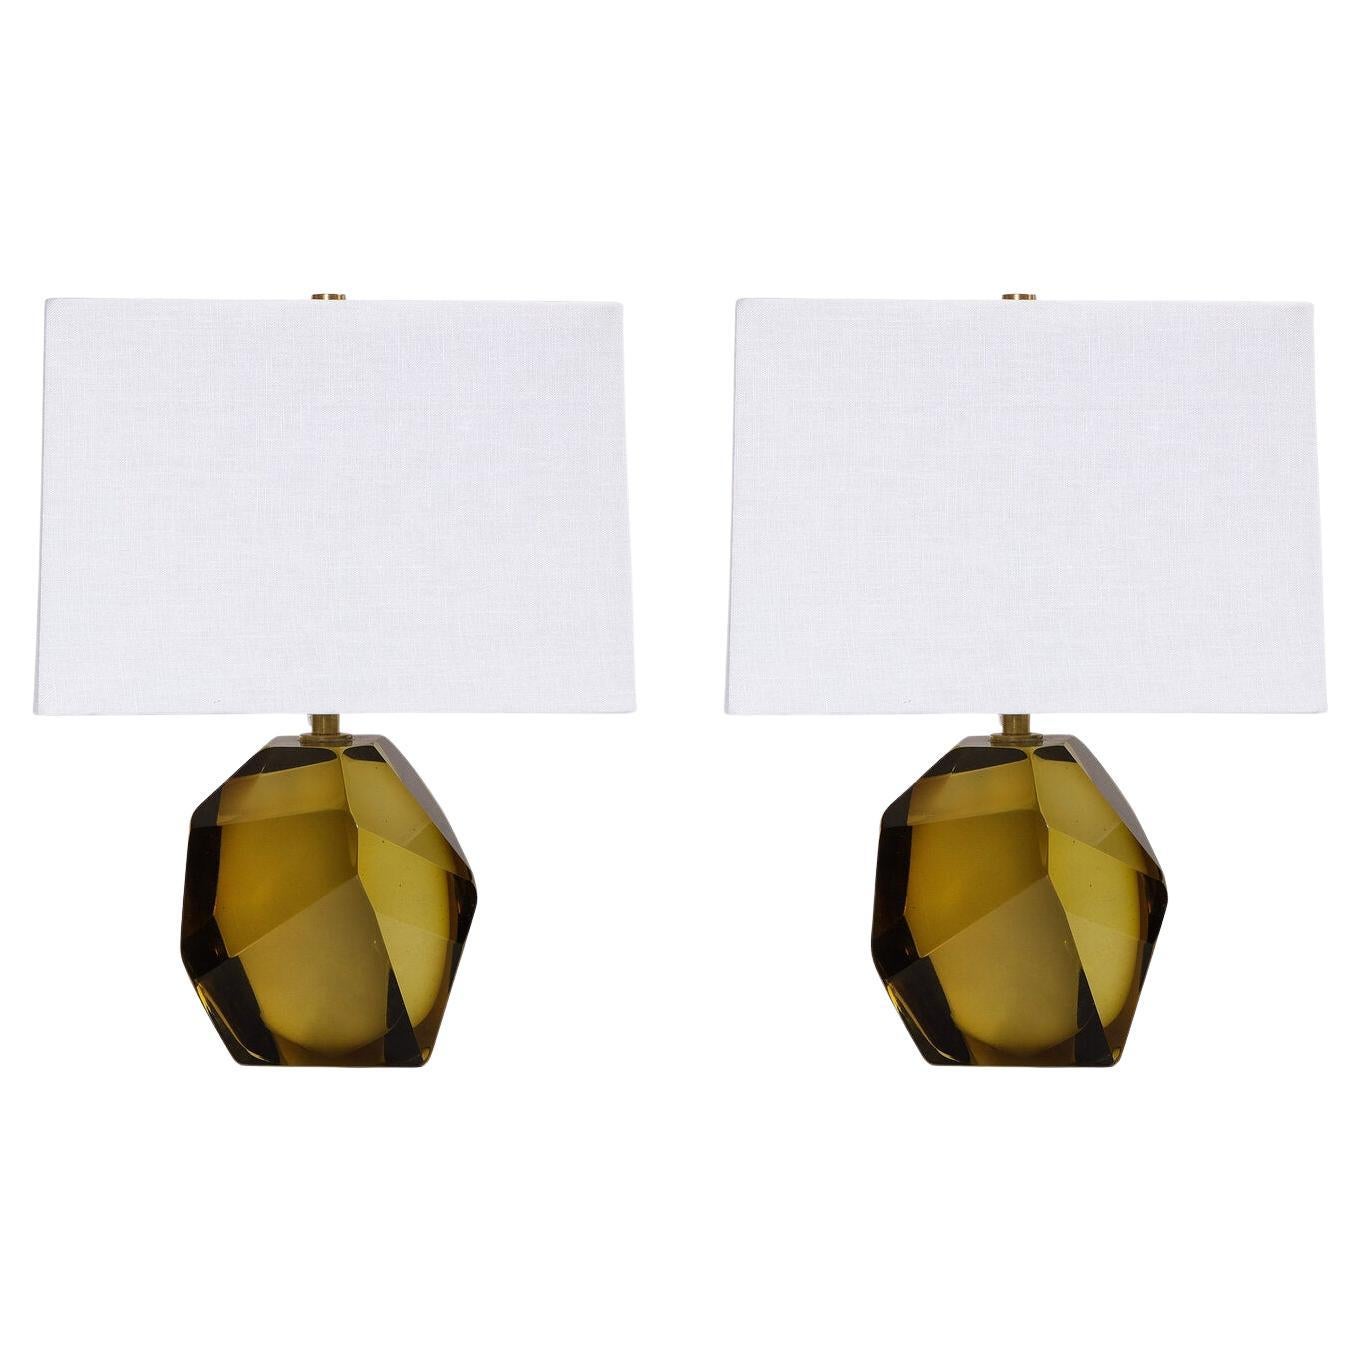 Modernist Table Lamps in Hand Blown Smoked Citrine Murano Glass